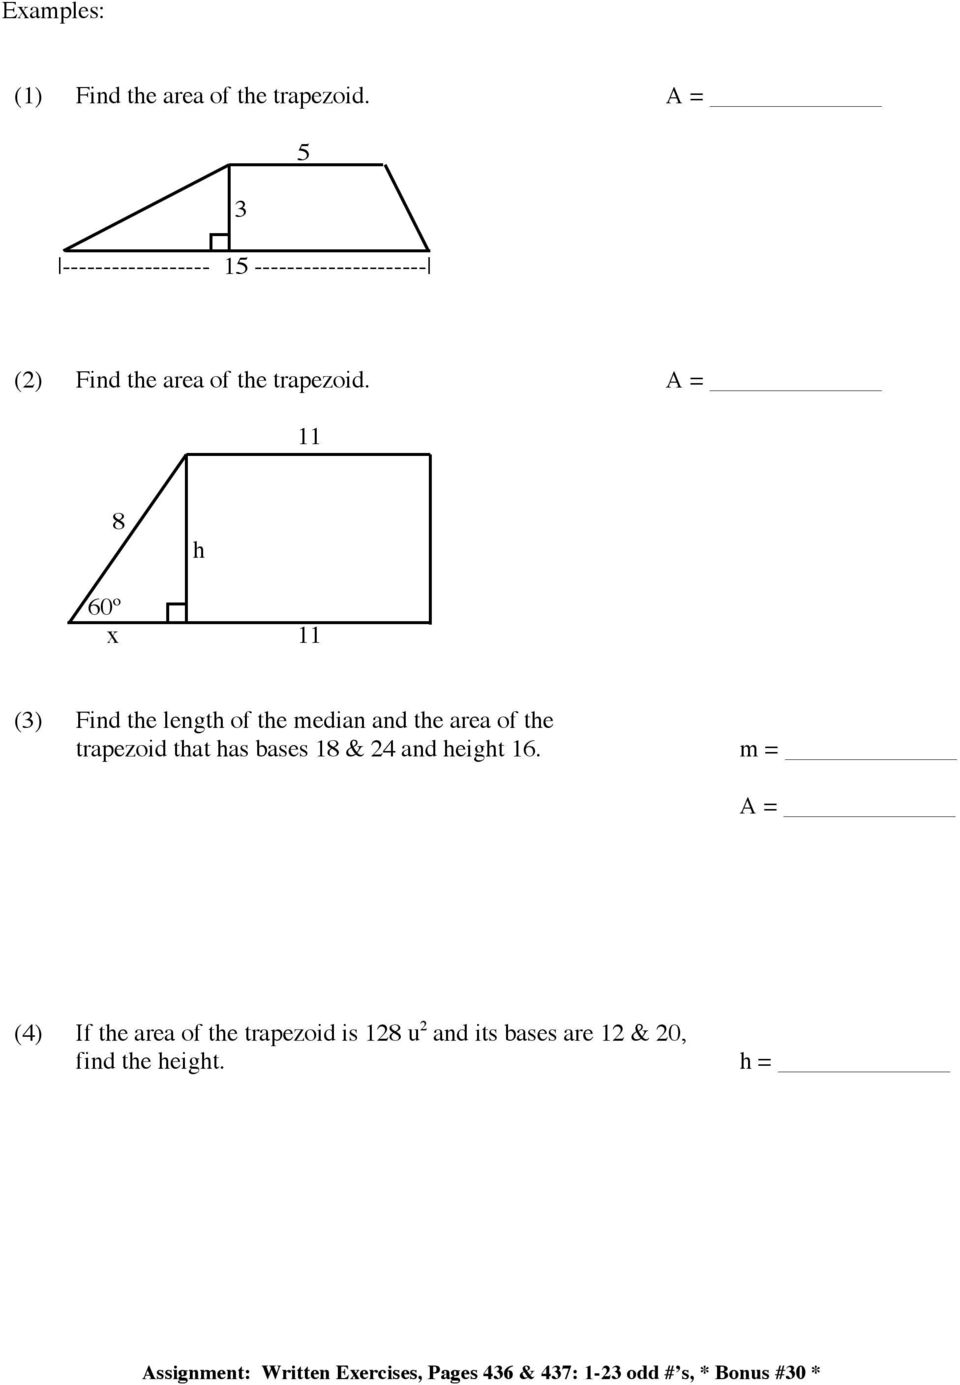 11 8 h 60º x 11 (3) Find the length of the median and the area of the trapezoid that has bases 18 & 24